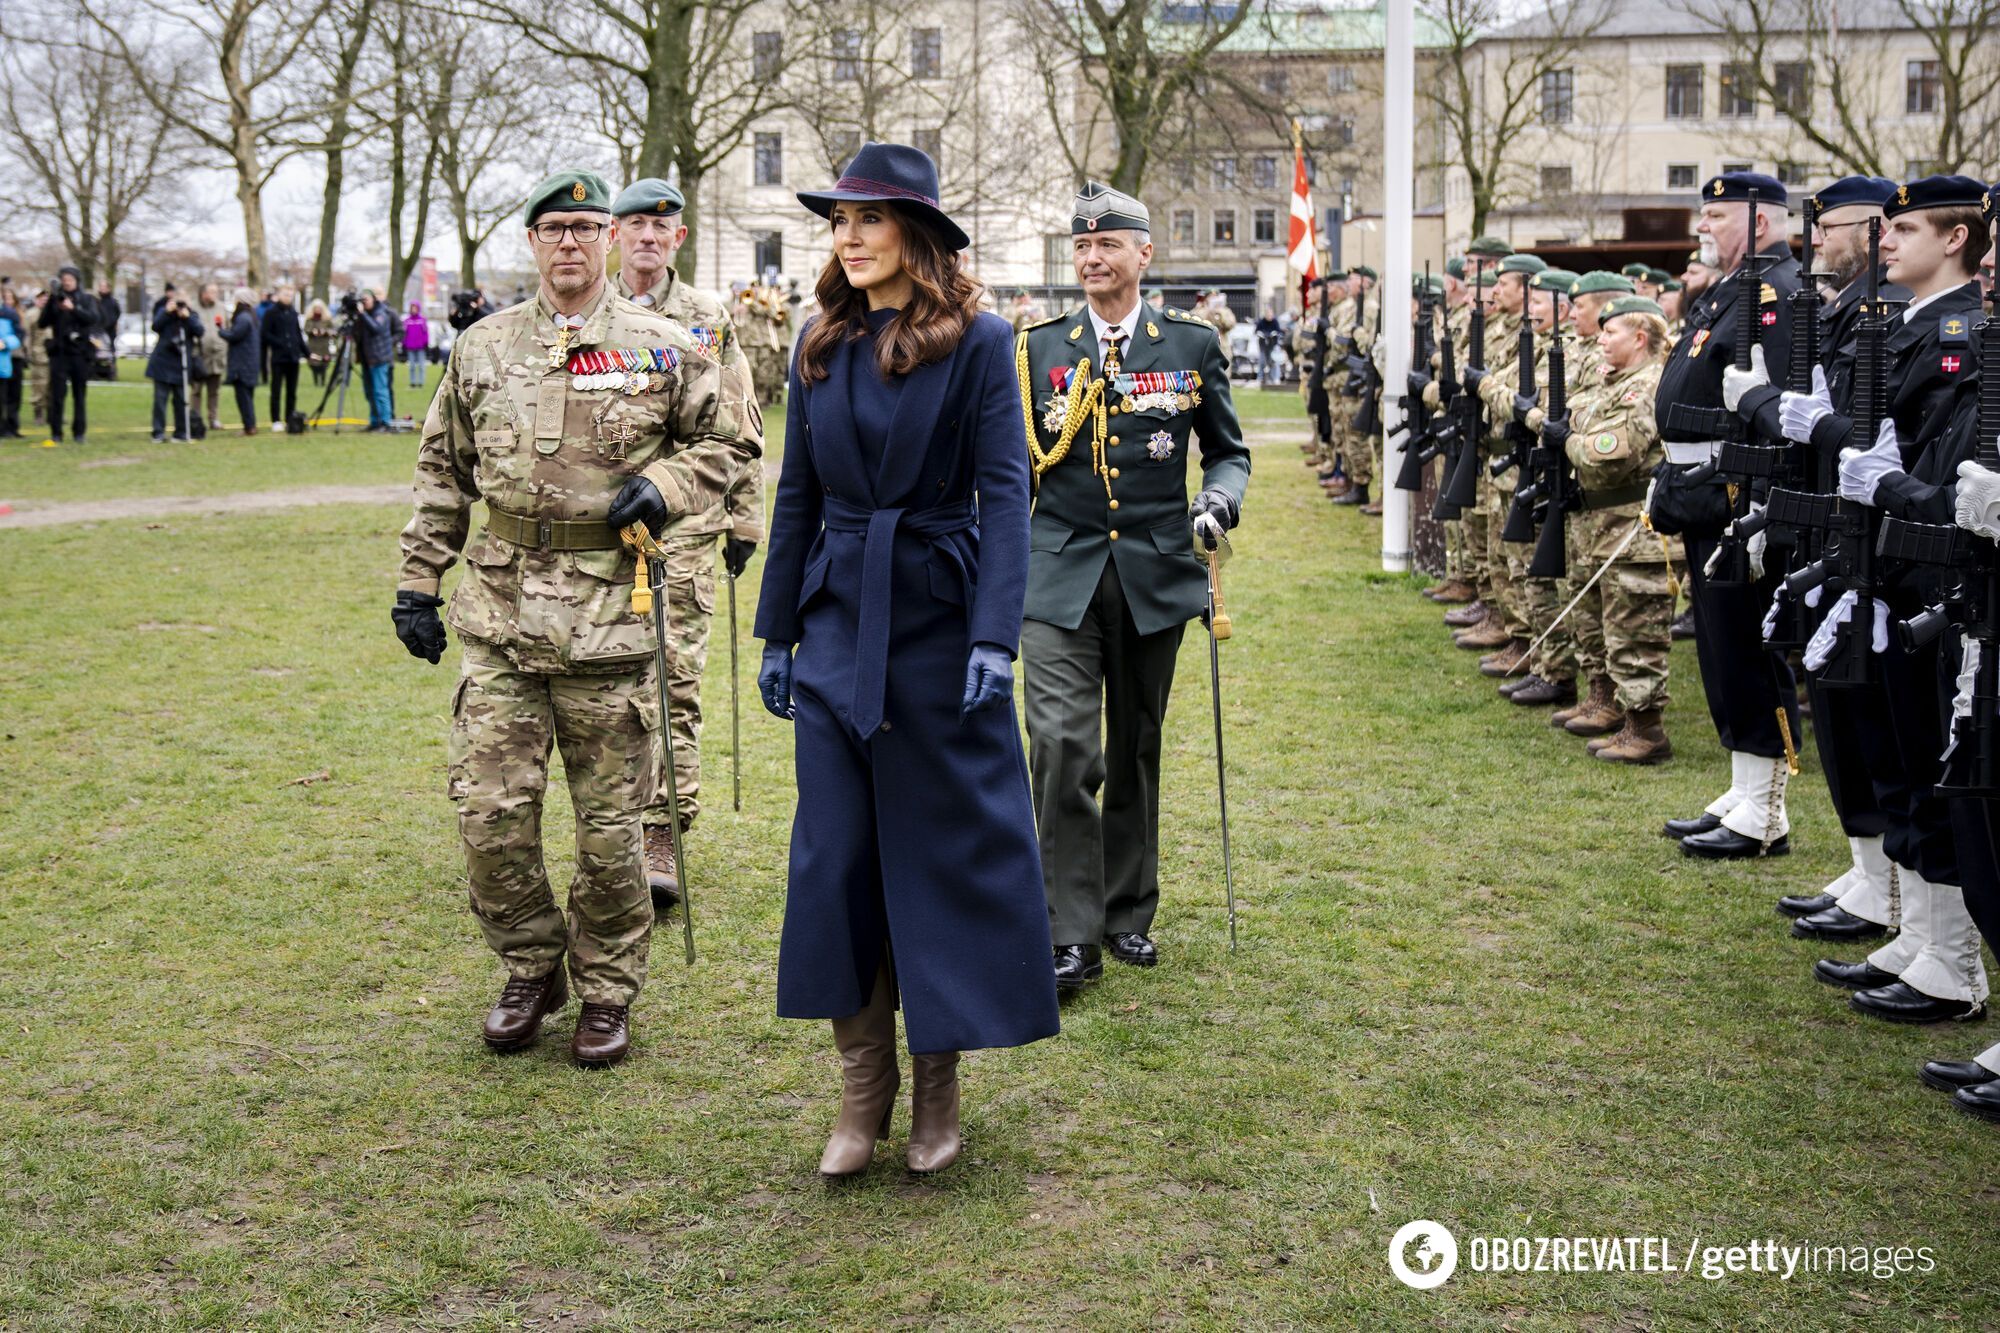 The flag was raised for a reason: the Queen of Denmark denied rumors of problems with King Frederik and announced the tragic news